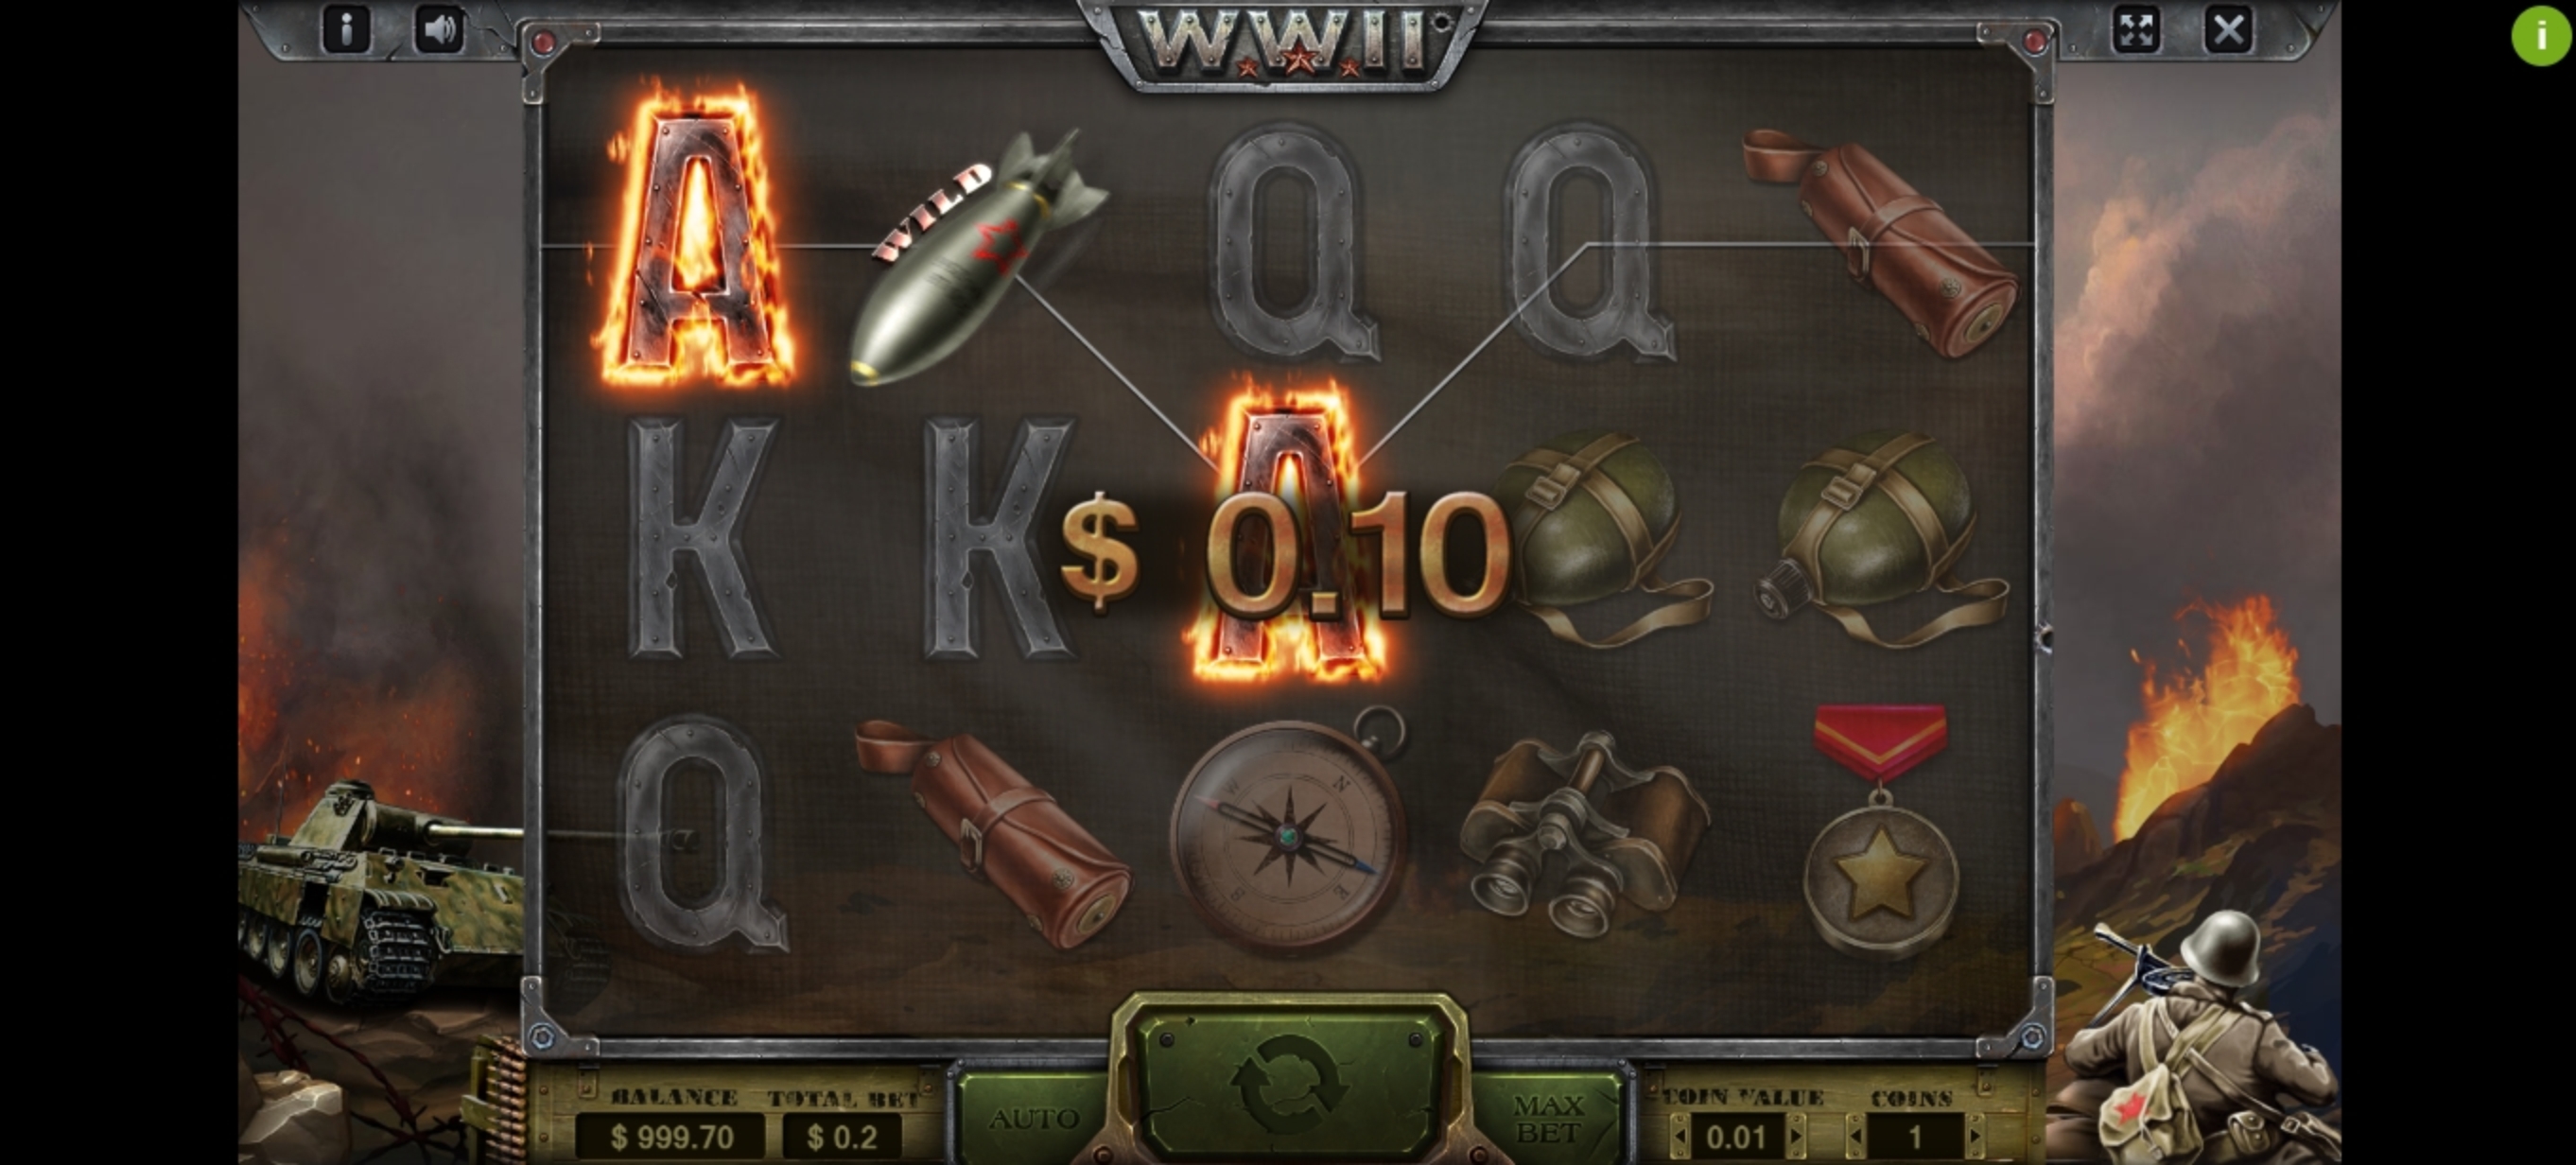 Win Money in WWII Free Slot Game by Charismatic